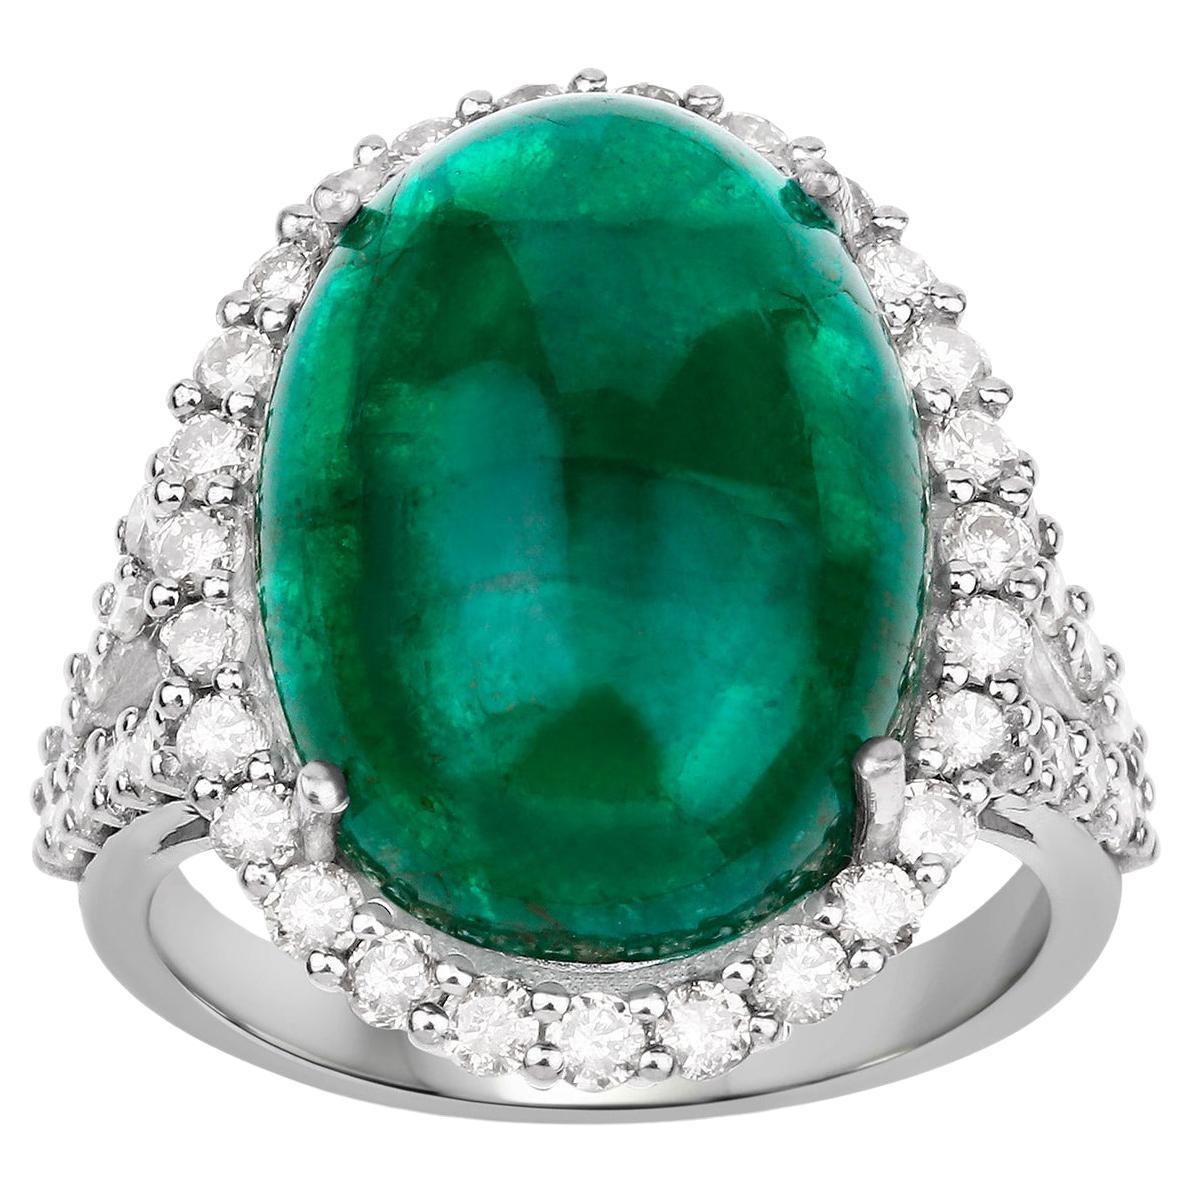 Cabochon Emerald Ring With Diamonds 18.04 Carats Rhodium Plated Sterling Silver